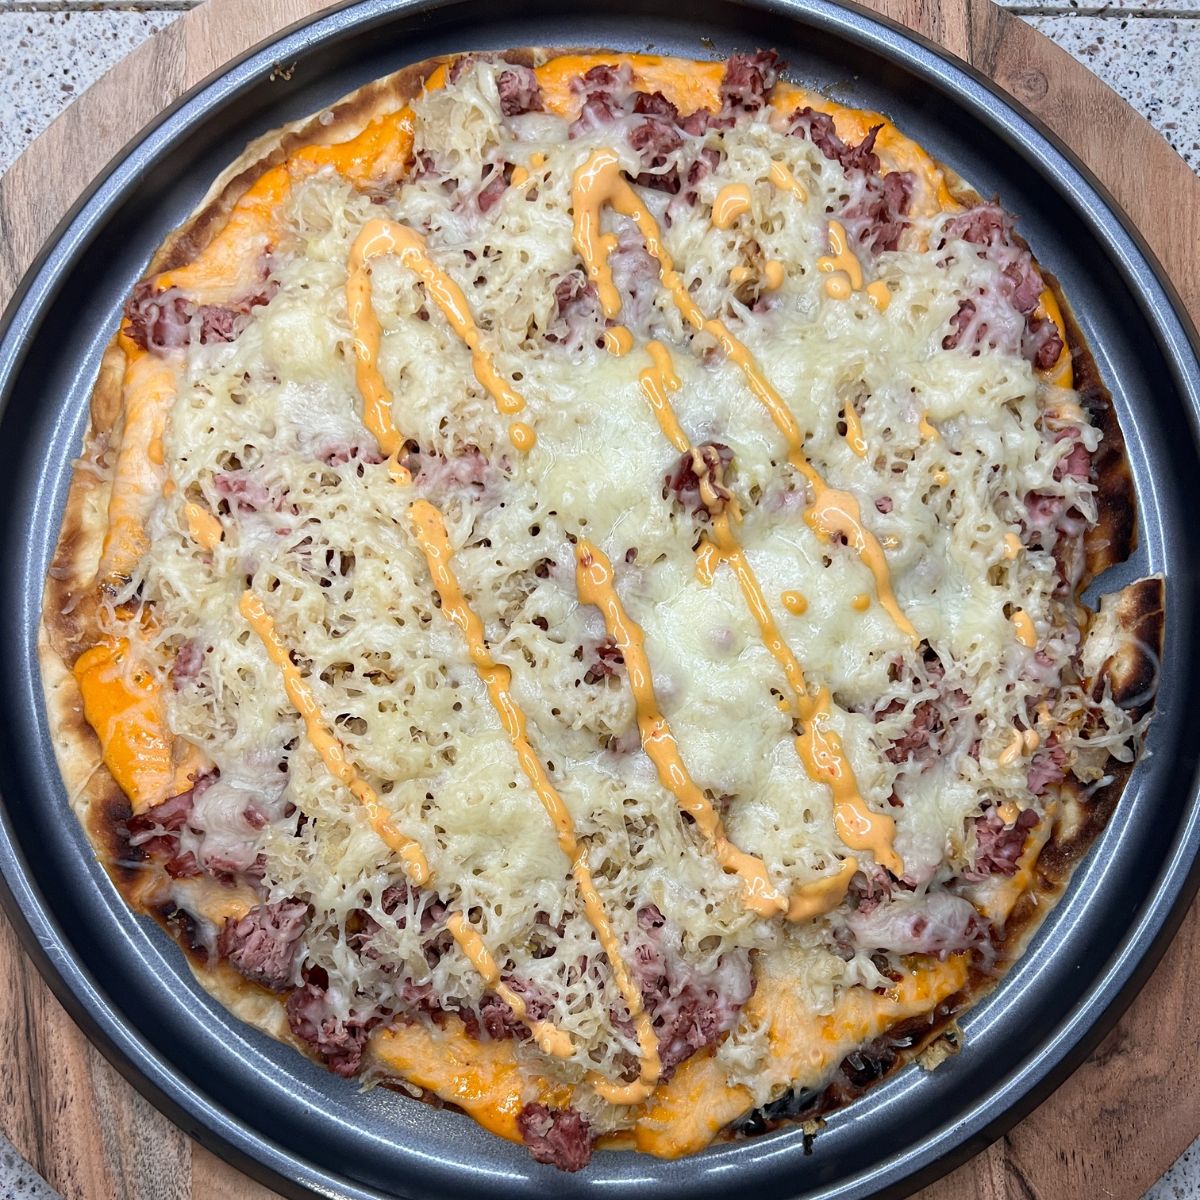 A pizza with meat and cheese on top.